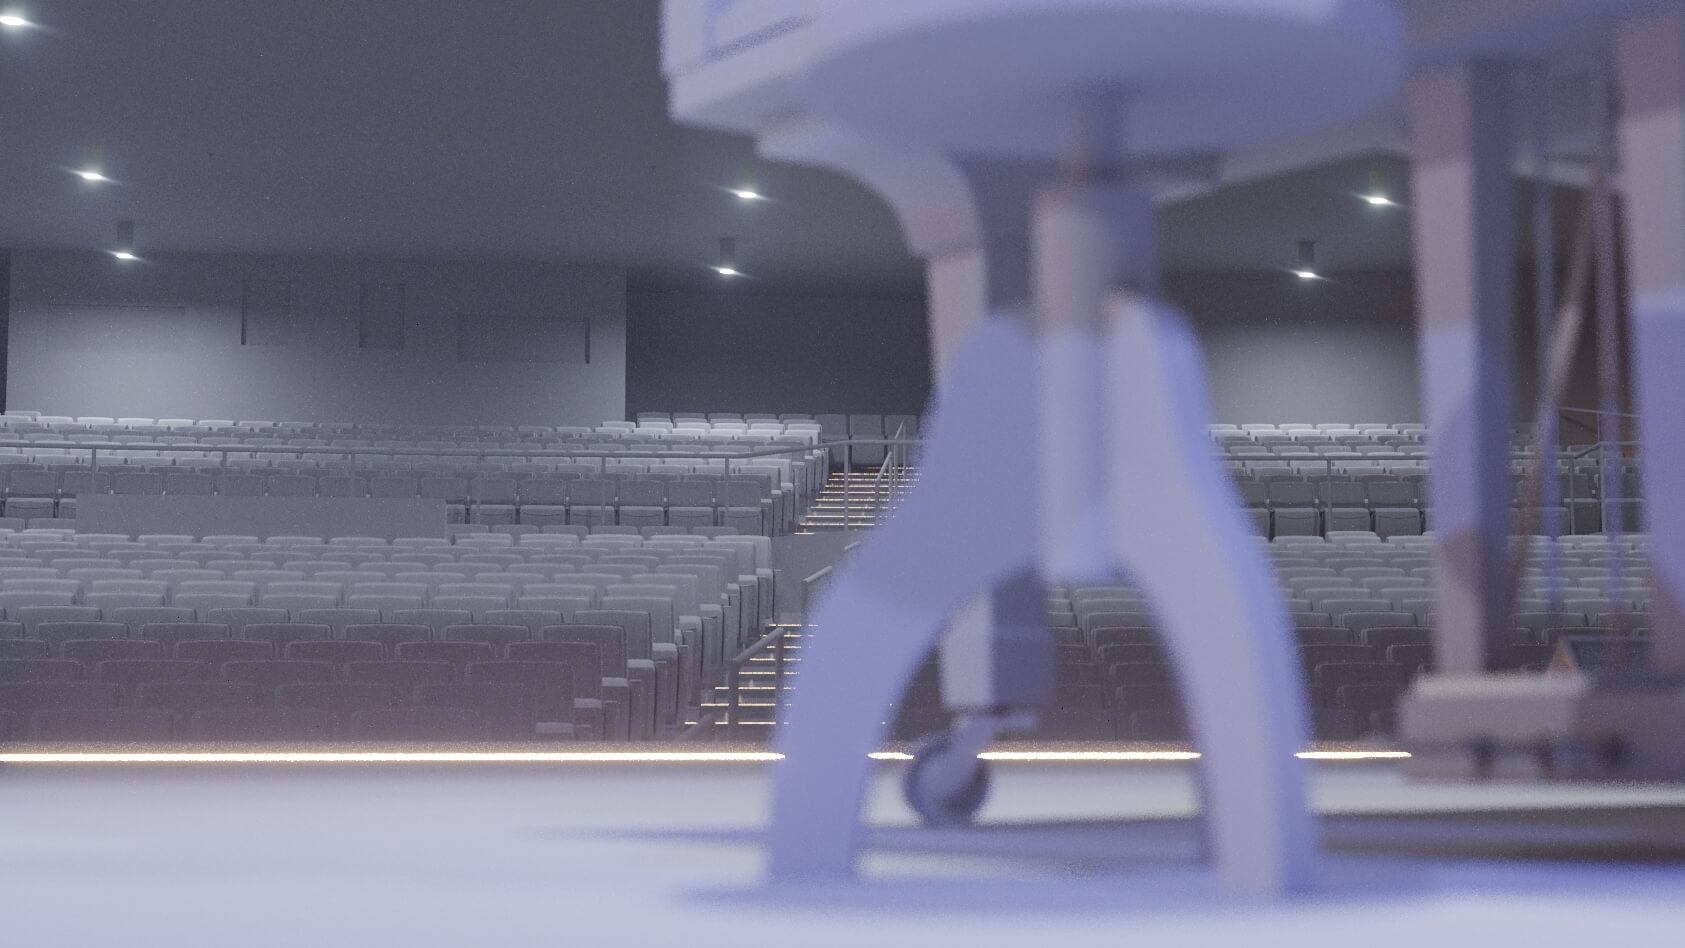 Theater Seating from the Stage for 3D Animation